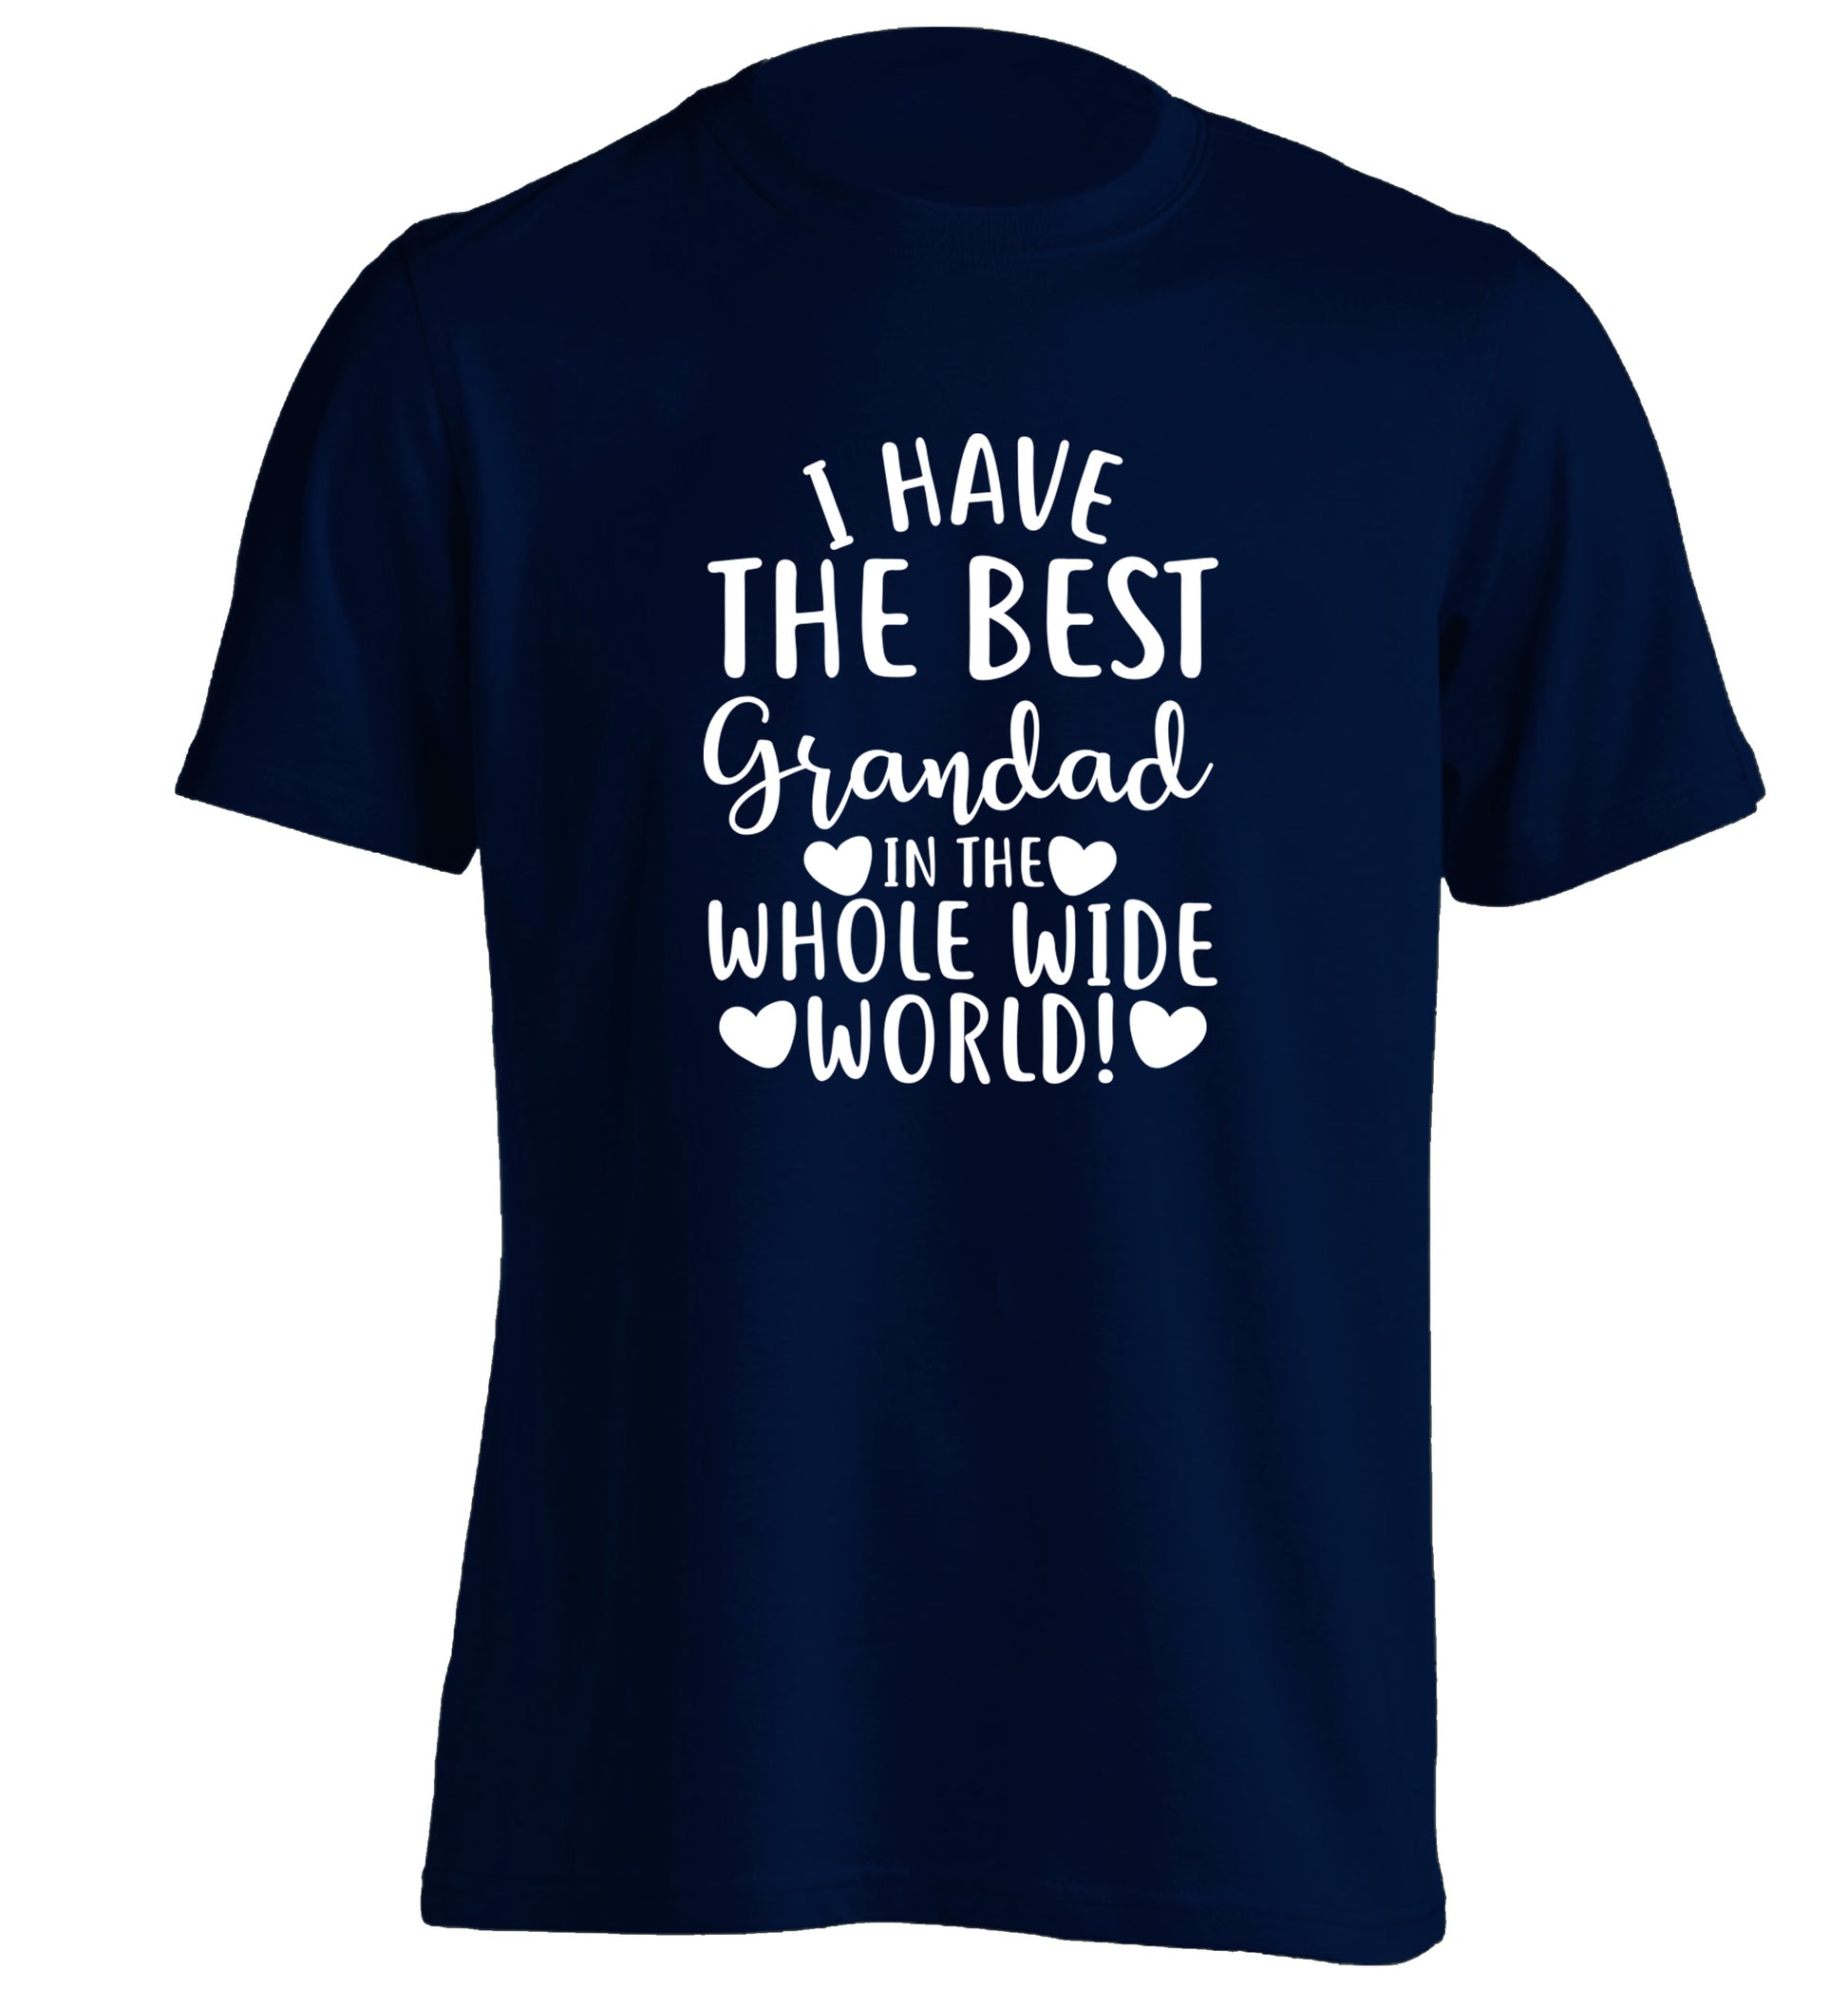 I have the best grandad in the whole wide world! adults unisex navy Tshirt 2XL